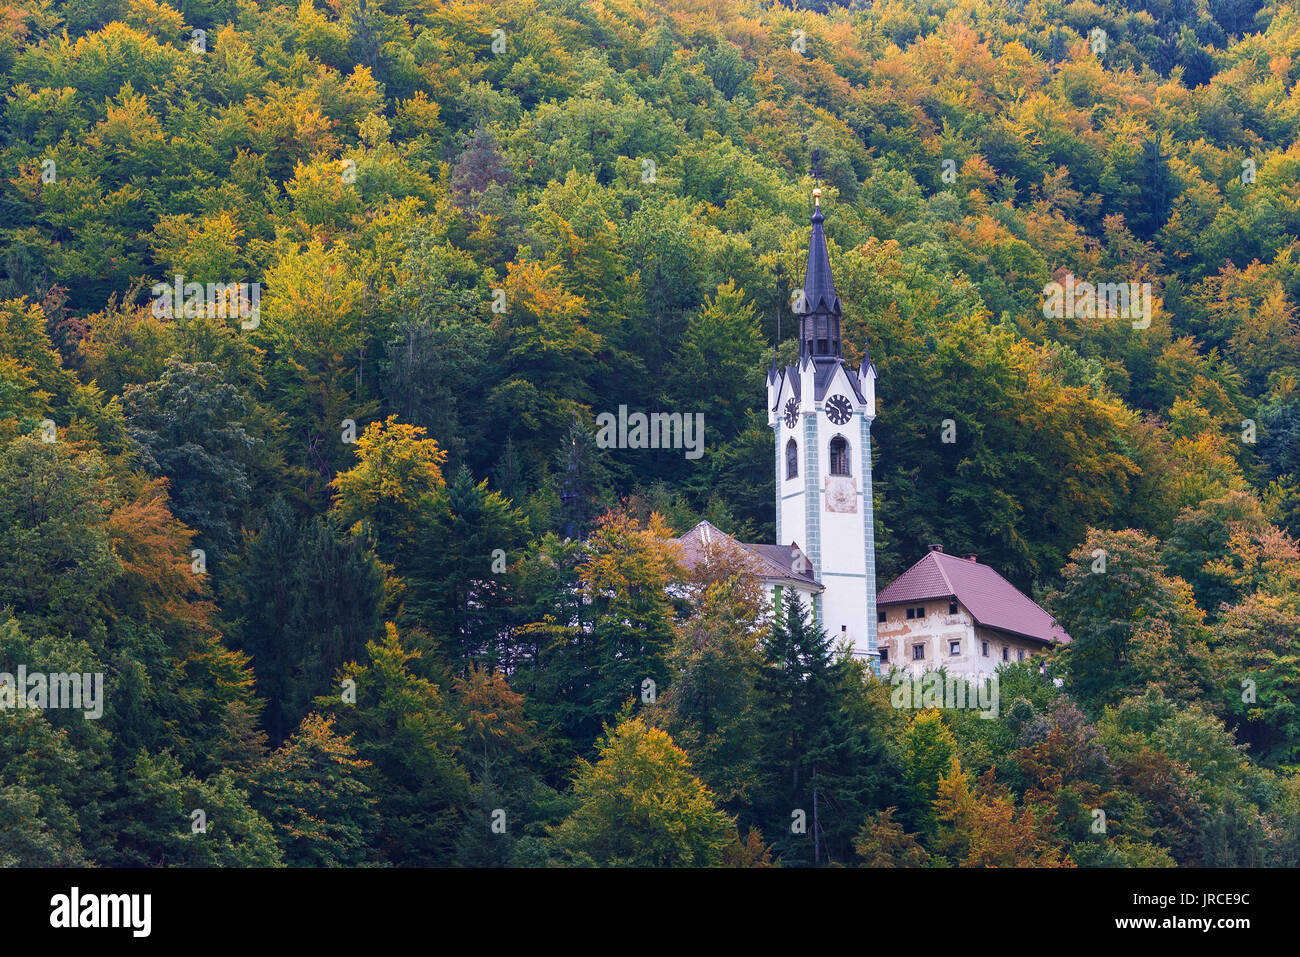 A roman catholic church in a forest on a hill surrounded by trees with autumn foliage in fall season near Bled in Slovenia. Stock Photo